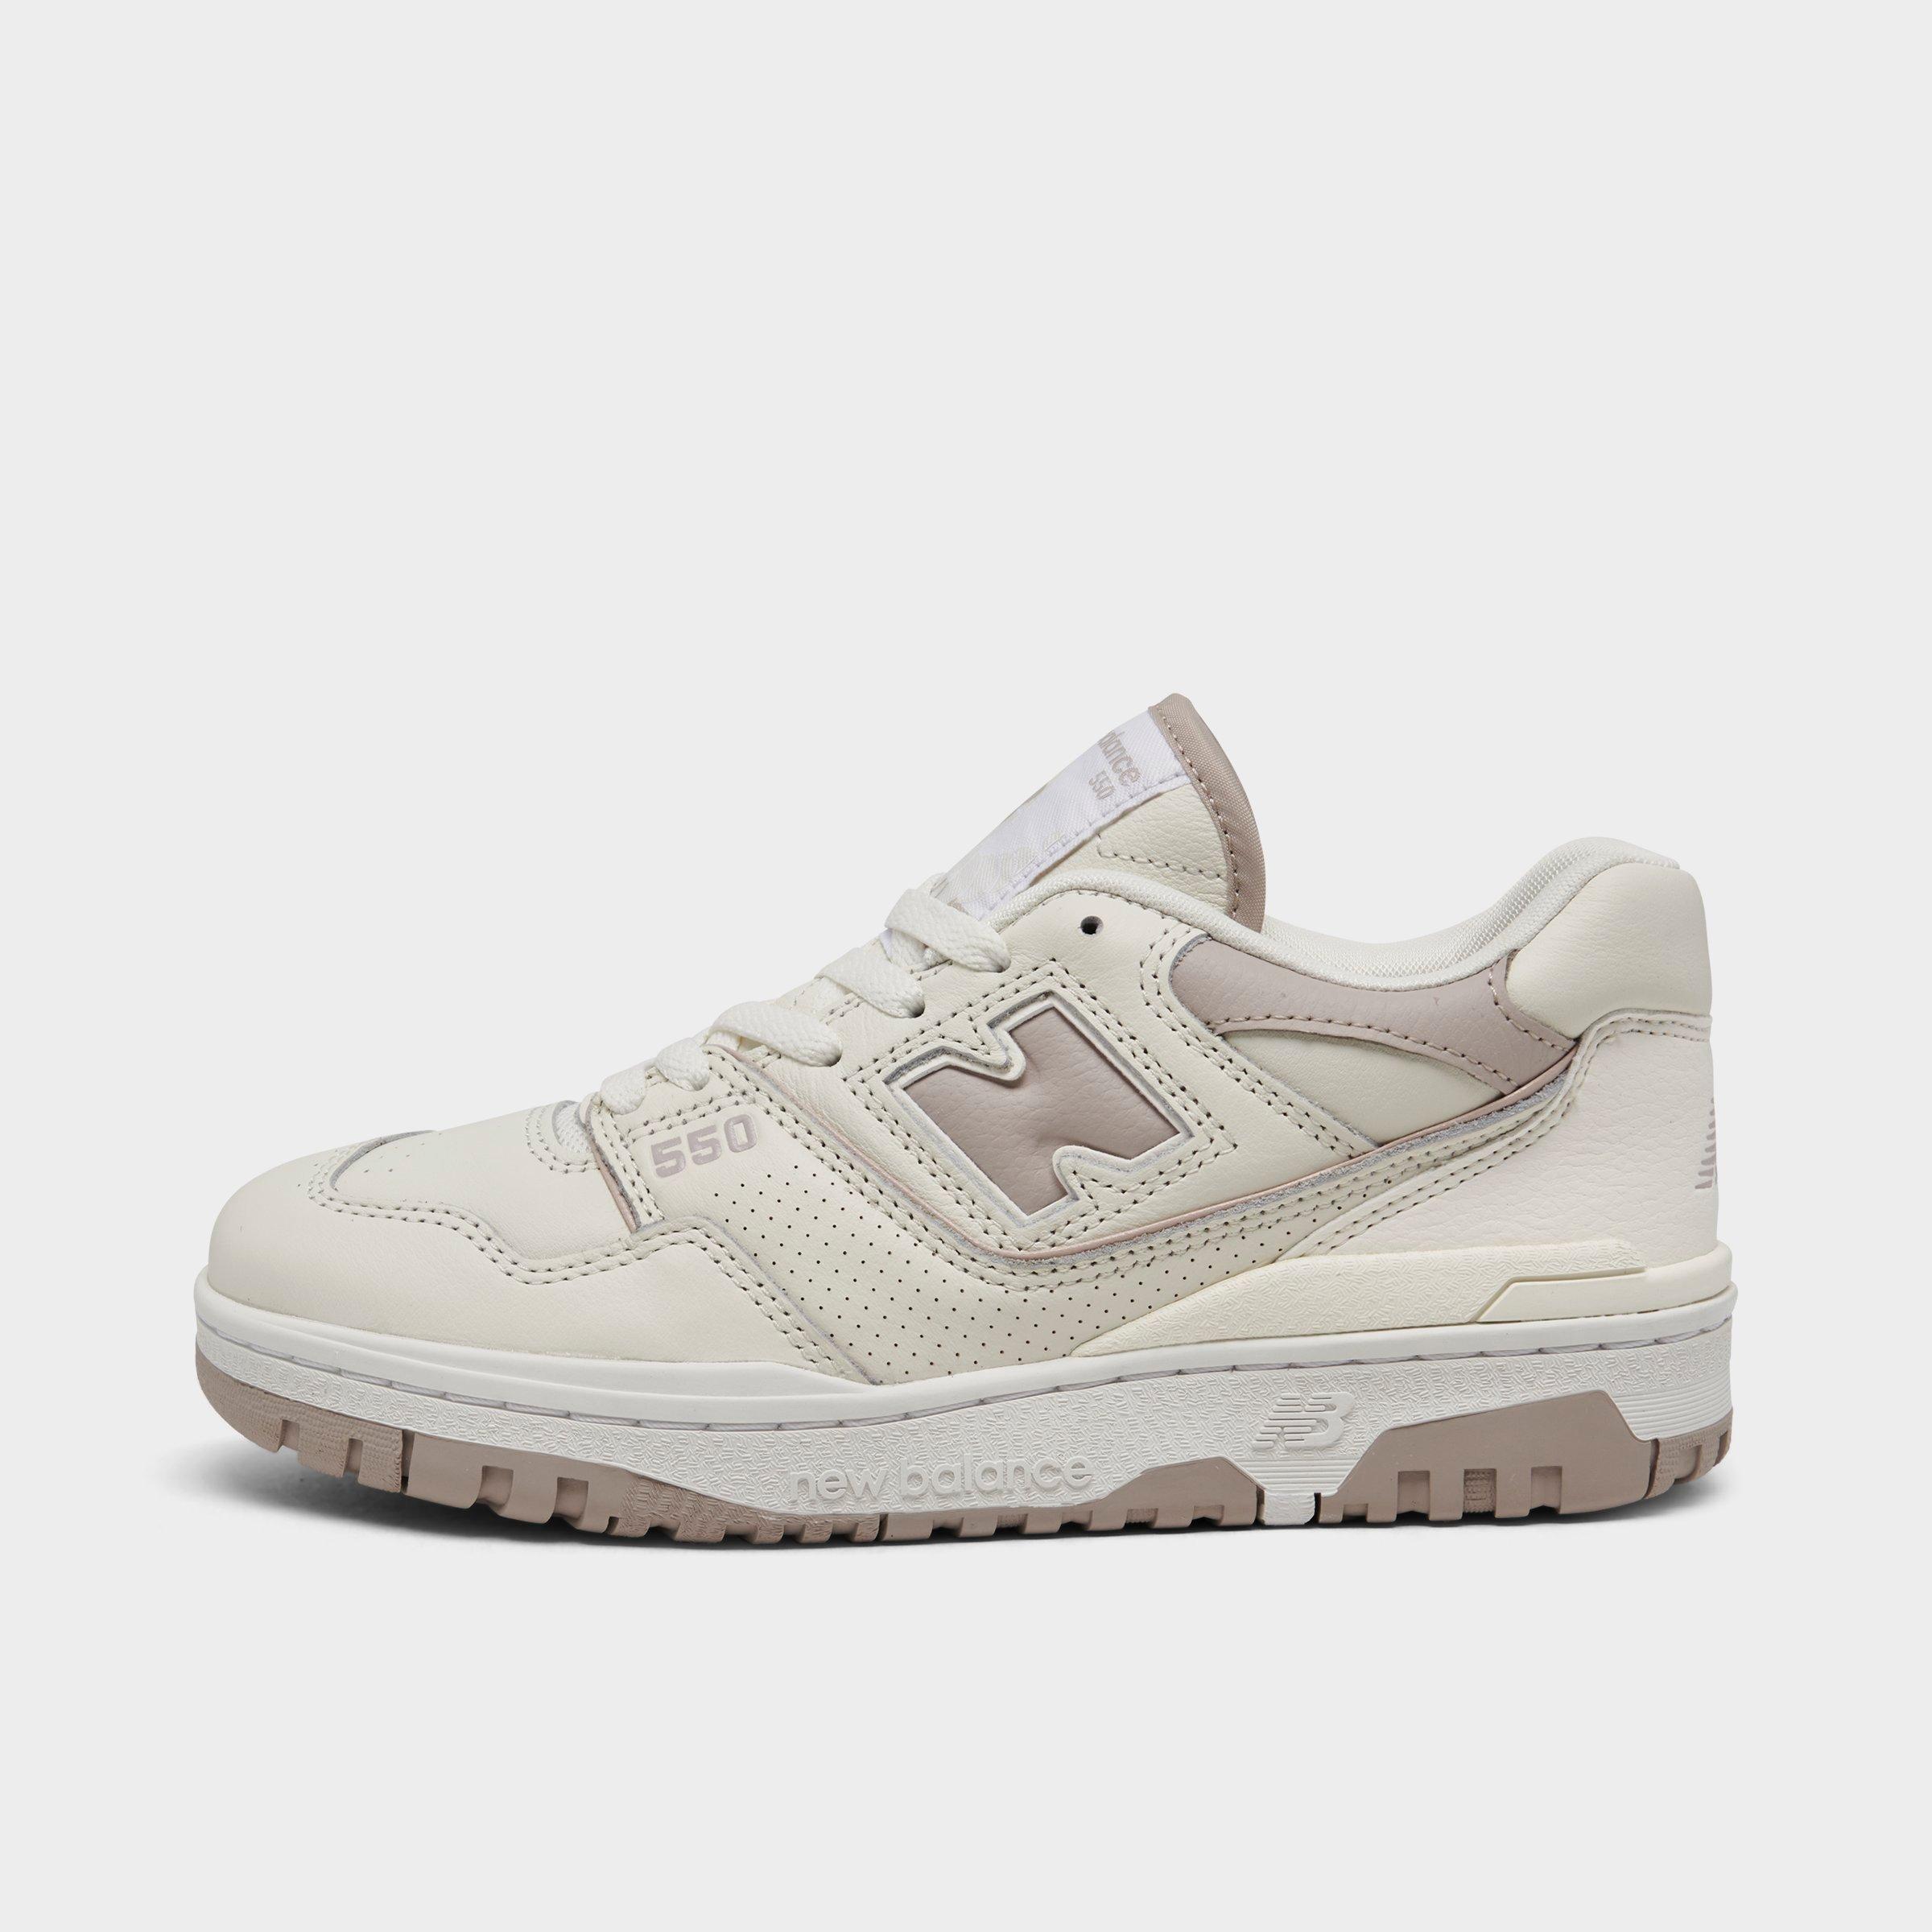 Women's New Balance 550 Casual Shoes | Finish Line